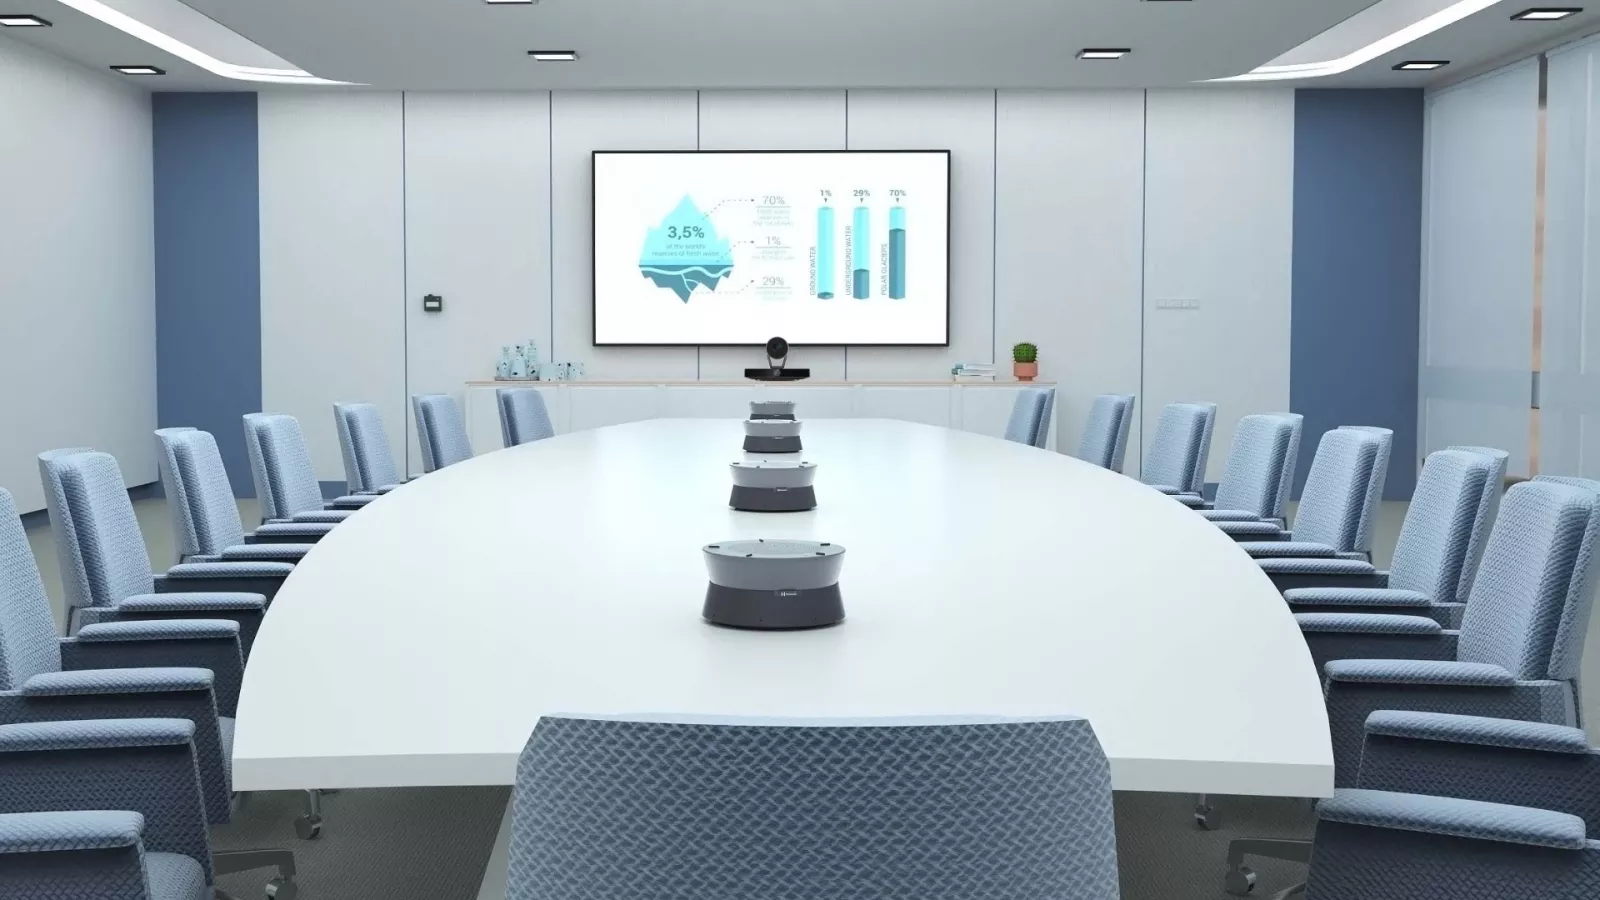 NEARITY Large Meeting Room Solution, A20 Speakerphone, Daisy Chain